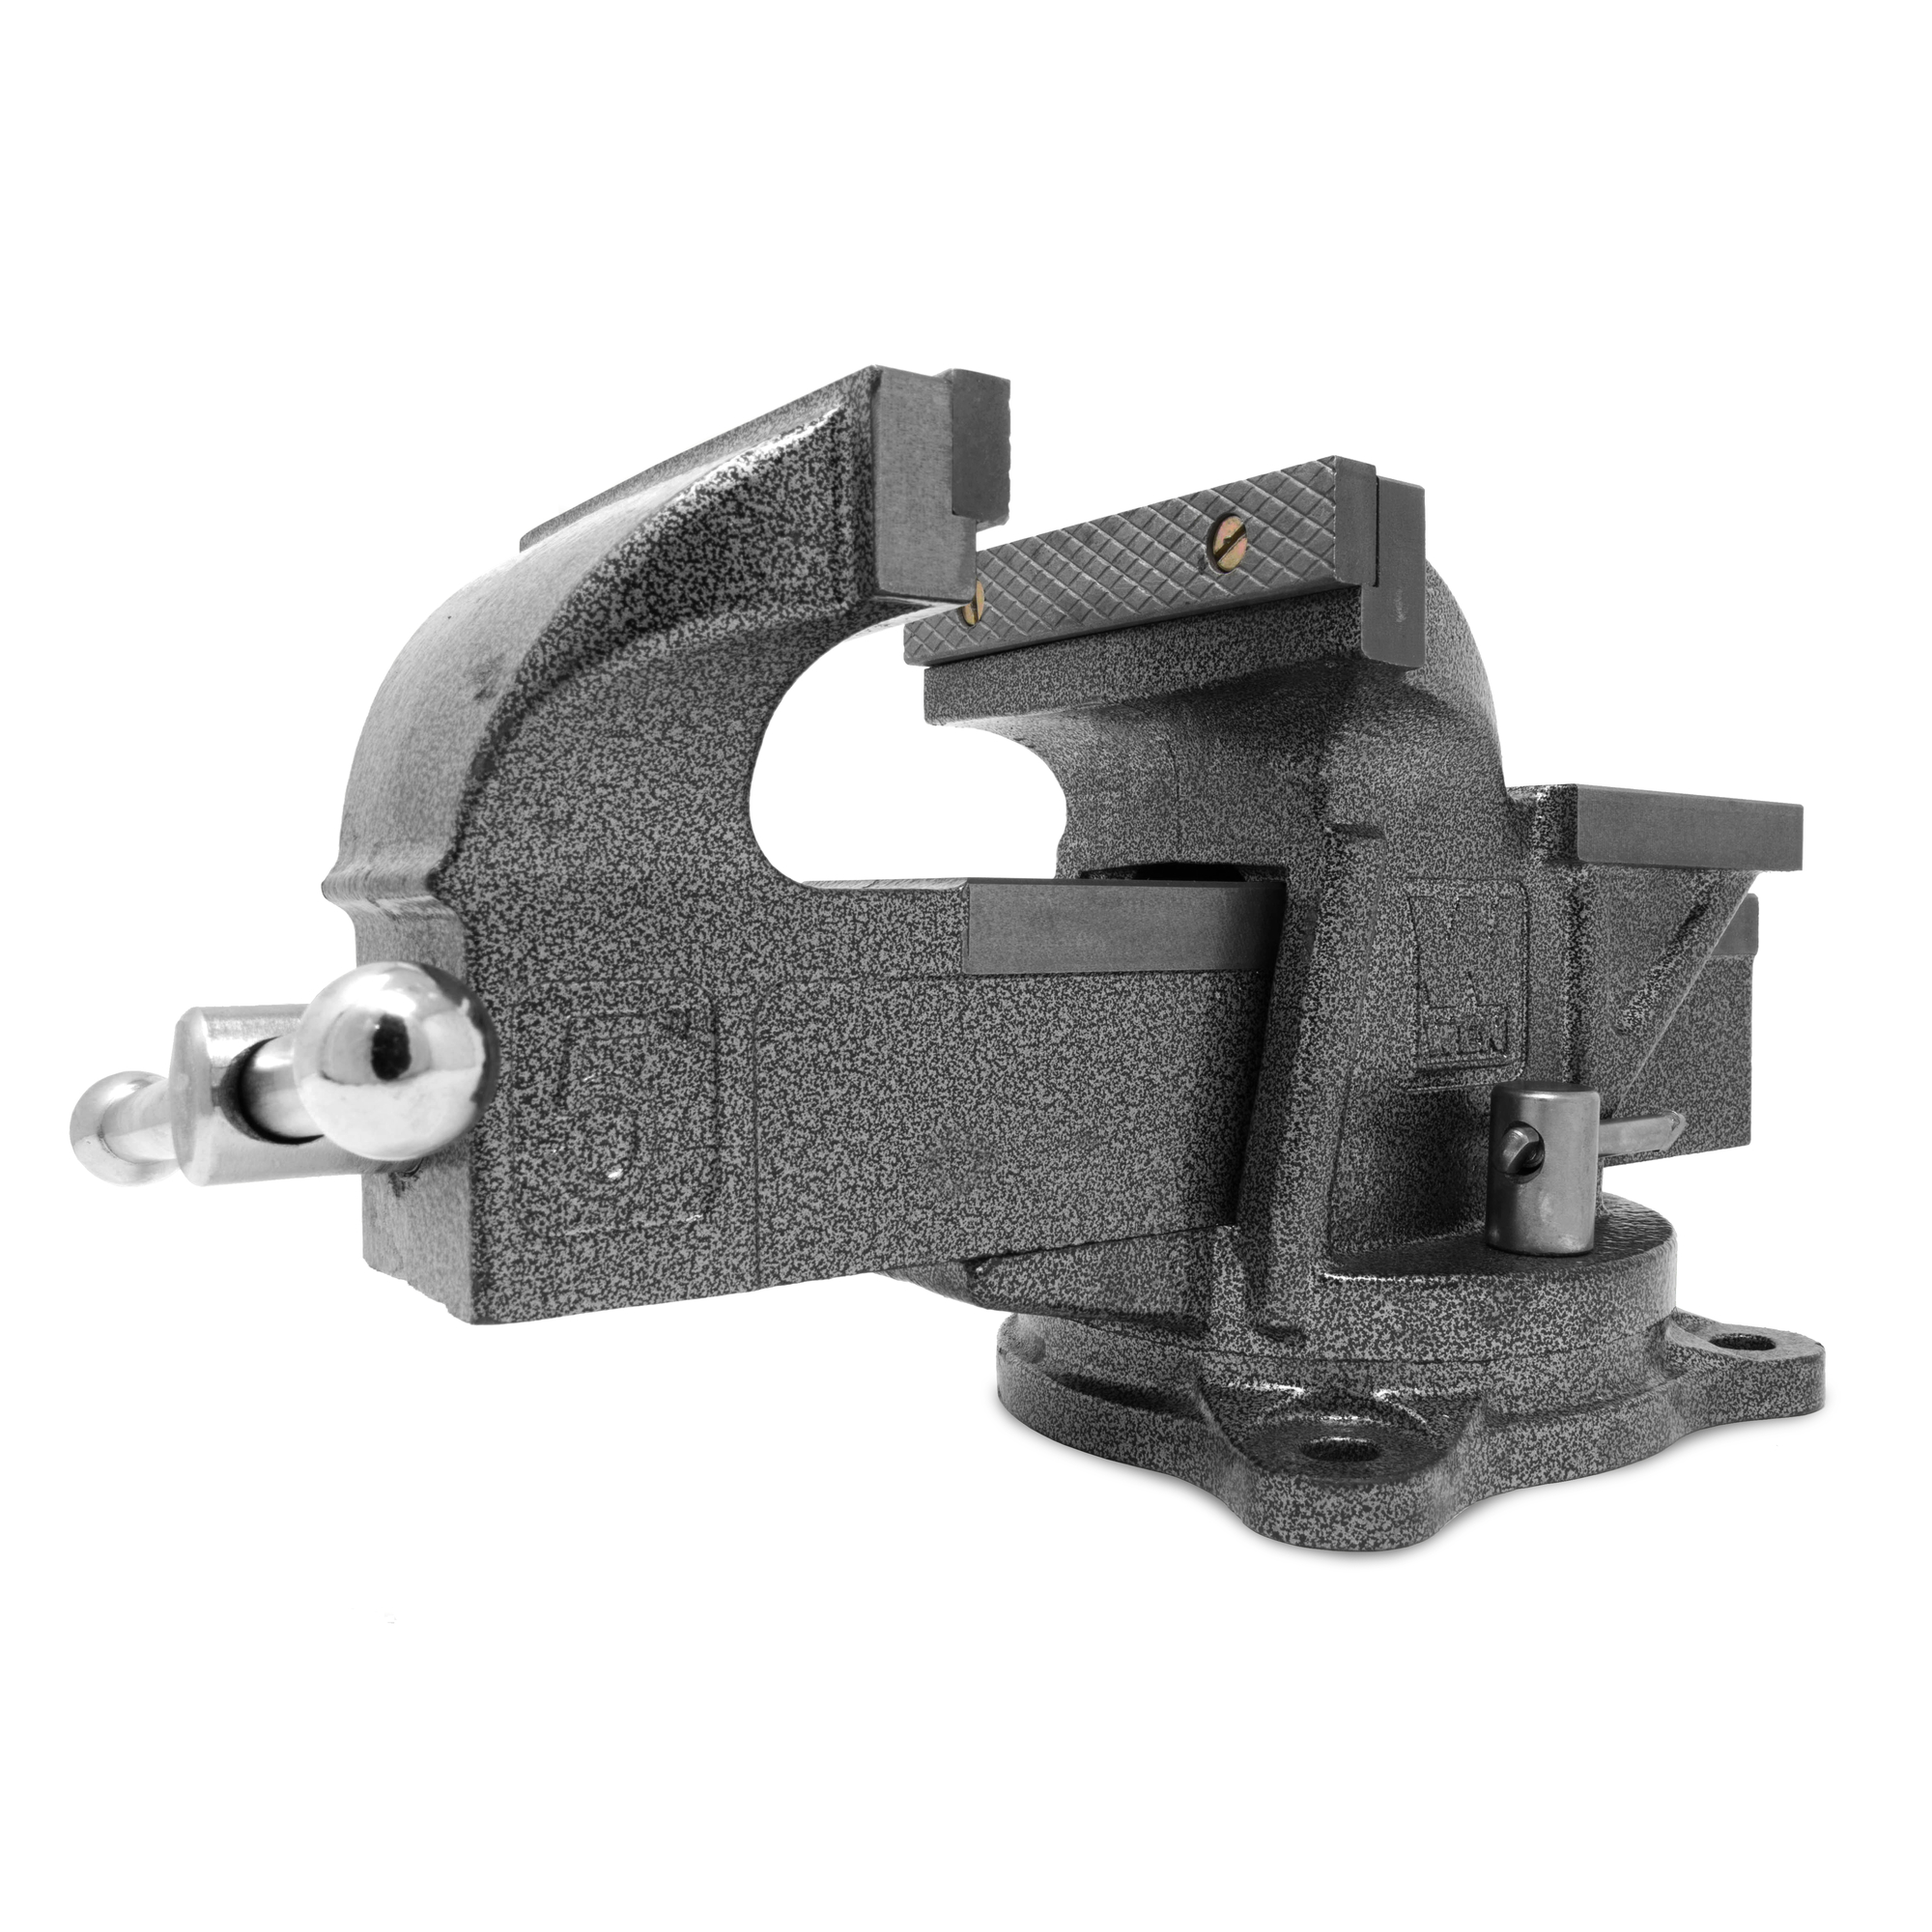 WEN, 5Inch Cast Iron Bench Vise with Swivel Base, Jaw Width 5 in, Jaw Capacity 6 in, Material Cast Iron, Model BV455